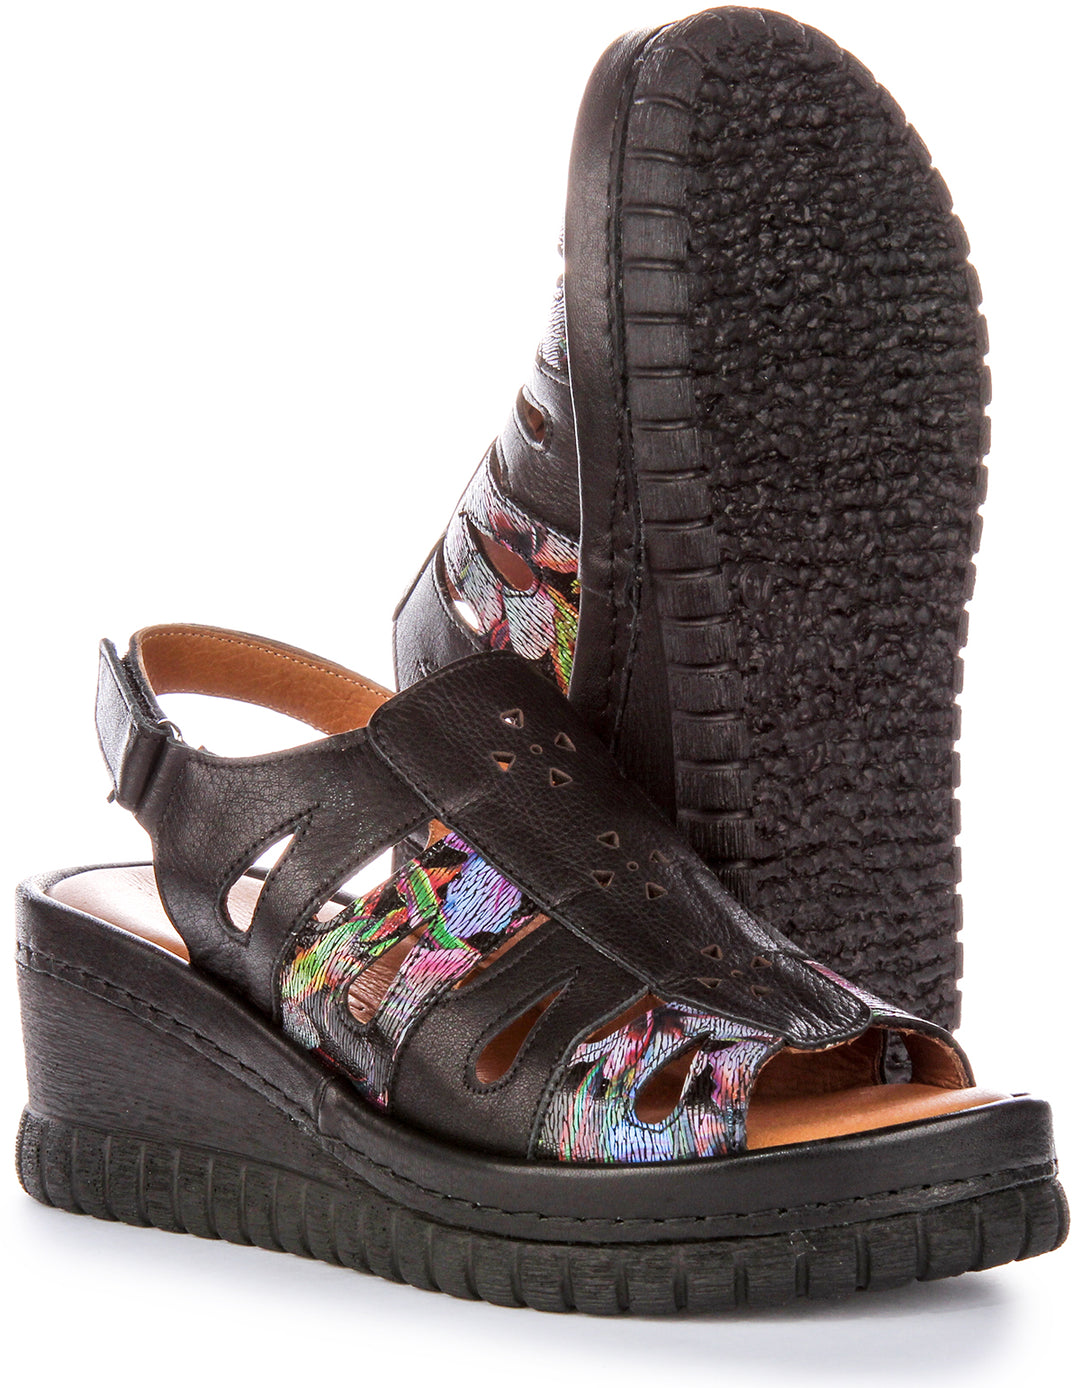 Justinreess England Zoey Soft Footbed In Black Floral